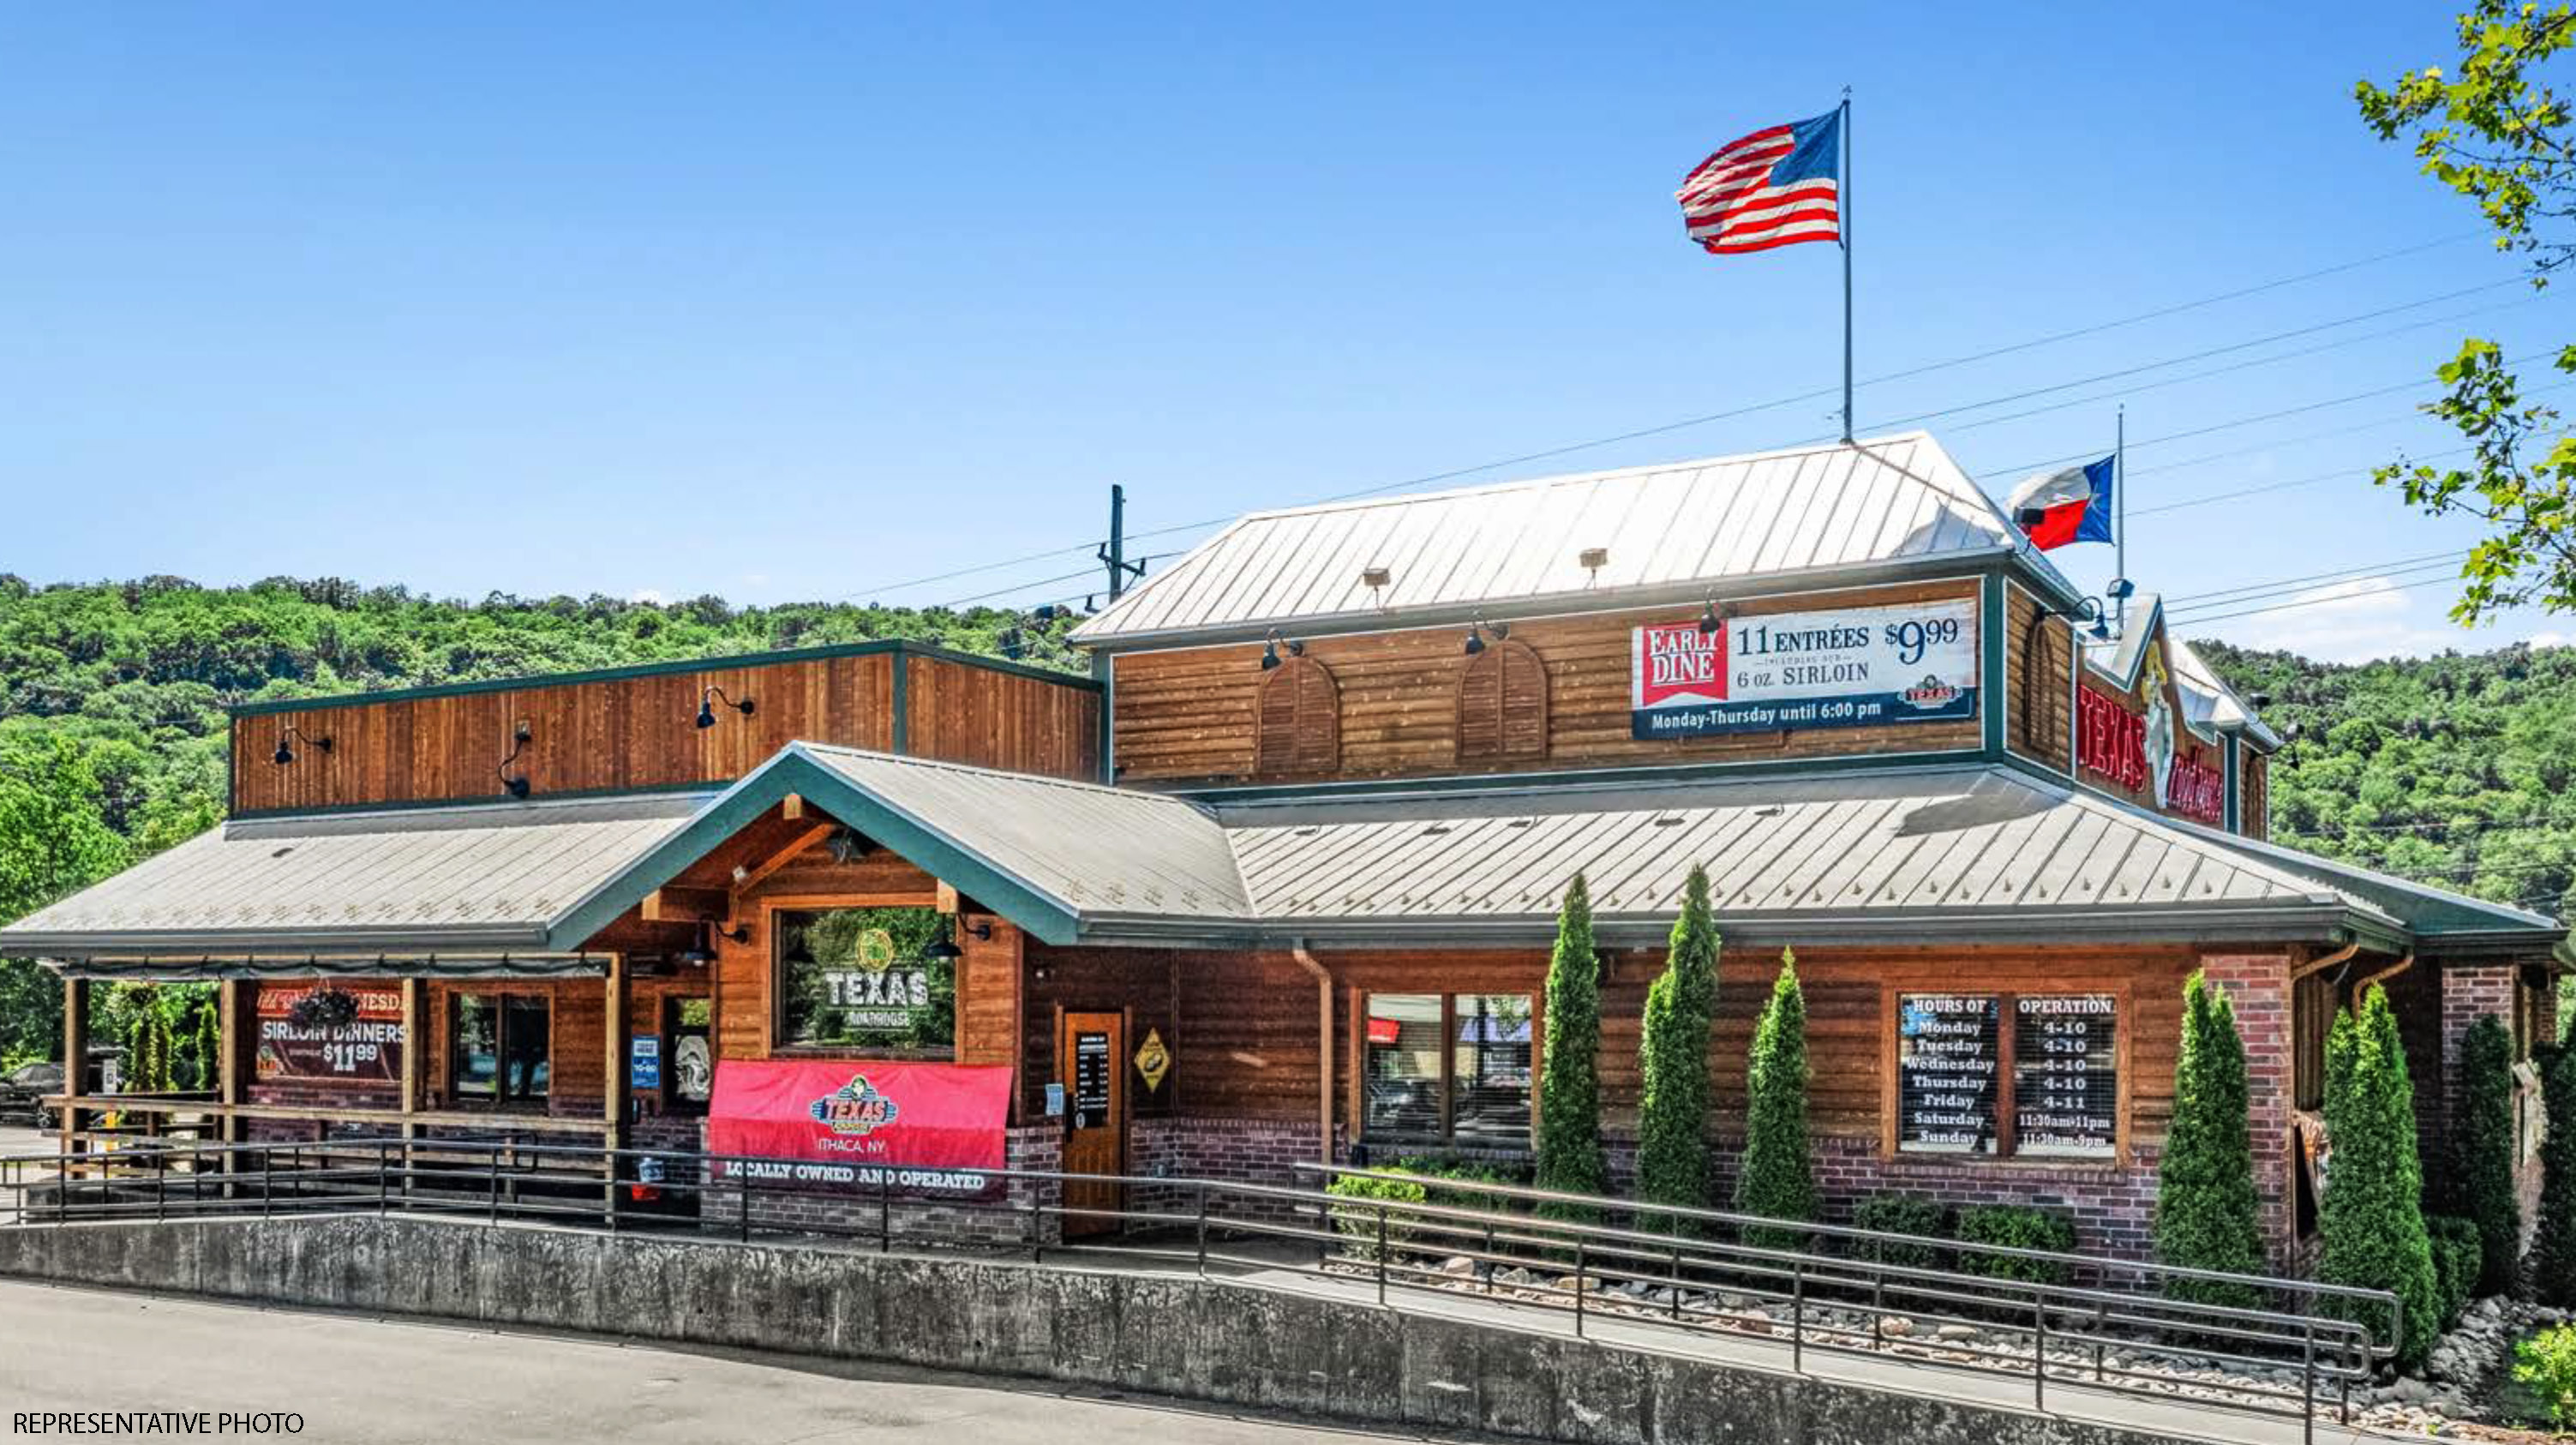 Hanley Investment Group Arranges Sale of Single-Tenant Texas Roadhouse in Ithaca, New York to California Buyer for $2.4 Million